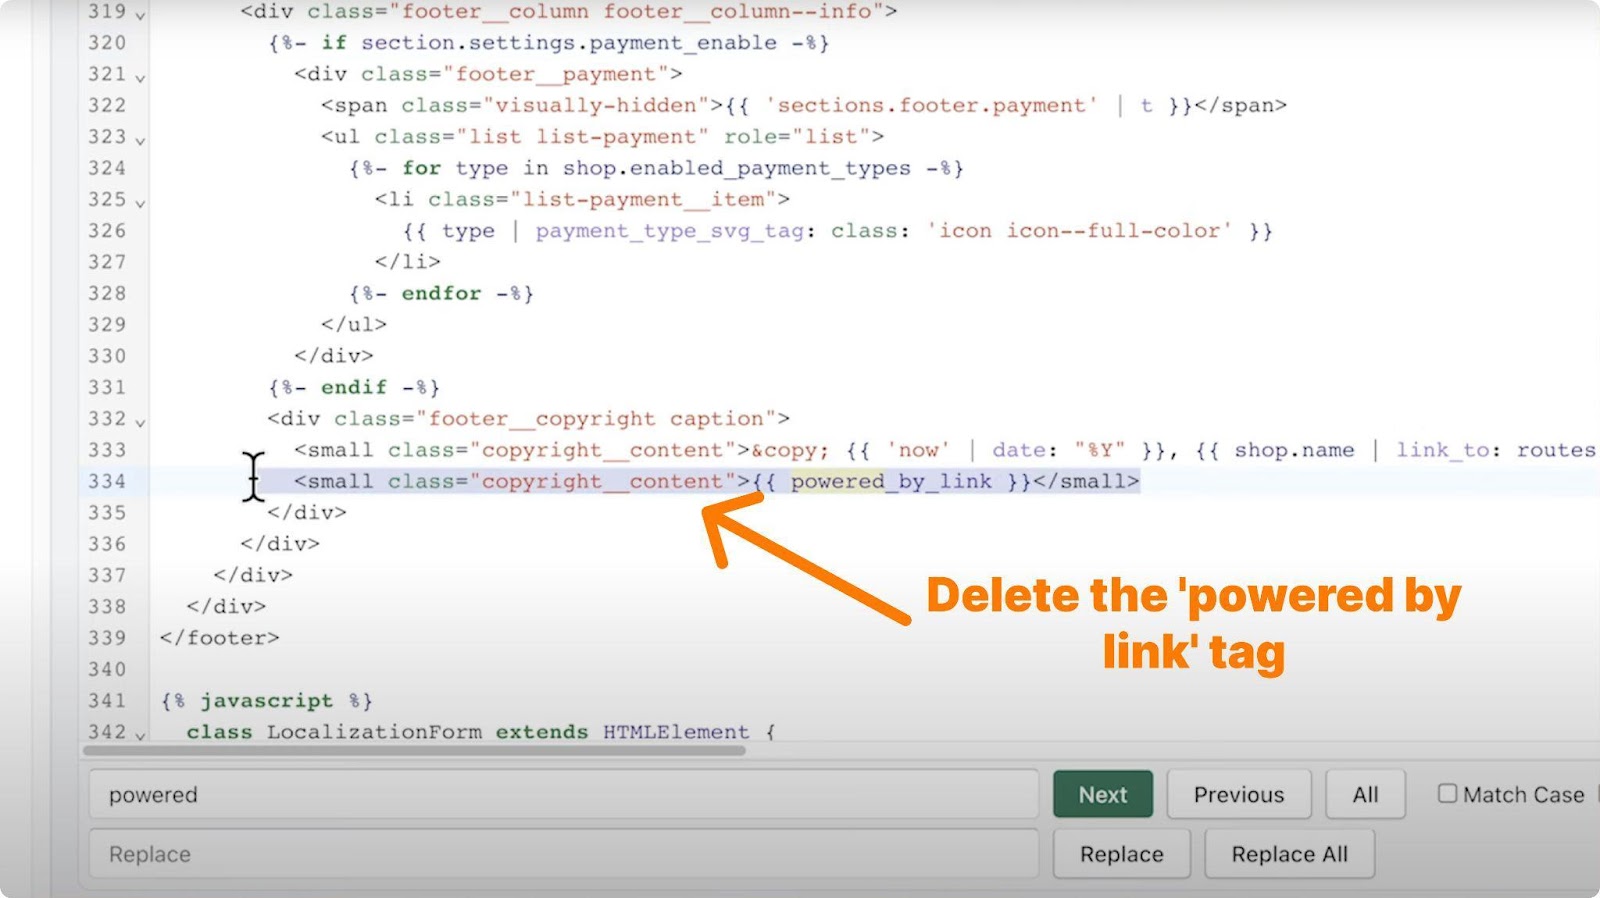 Then delete the line that puts the “powered by link” tag in your footer.